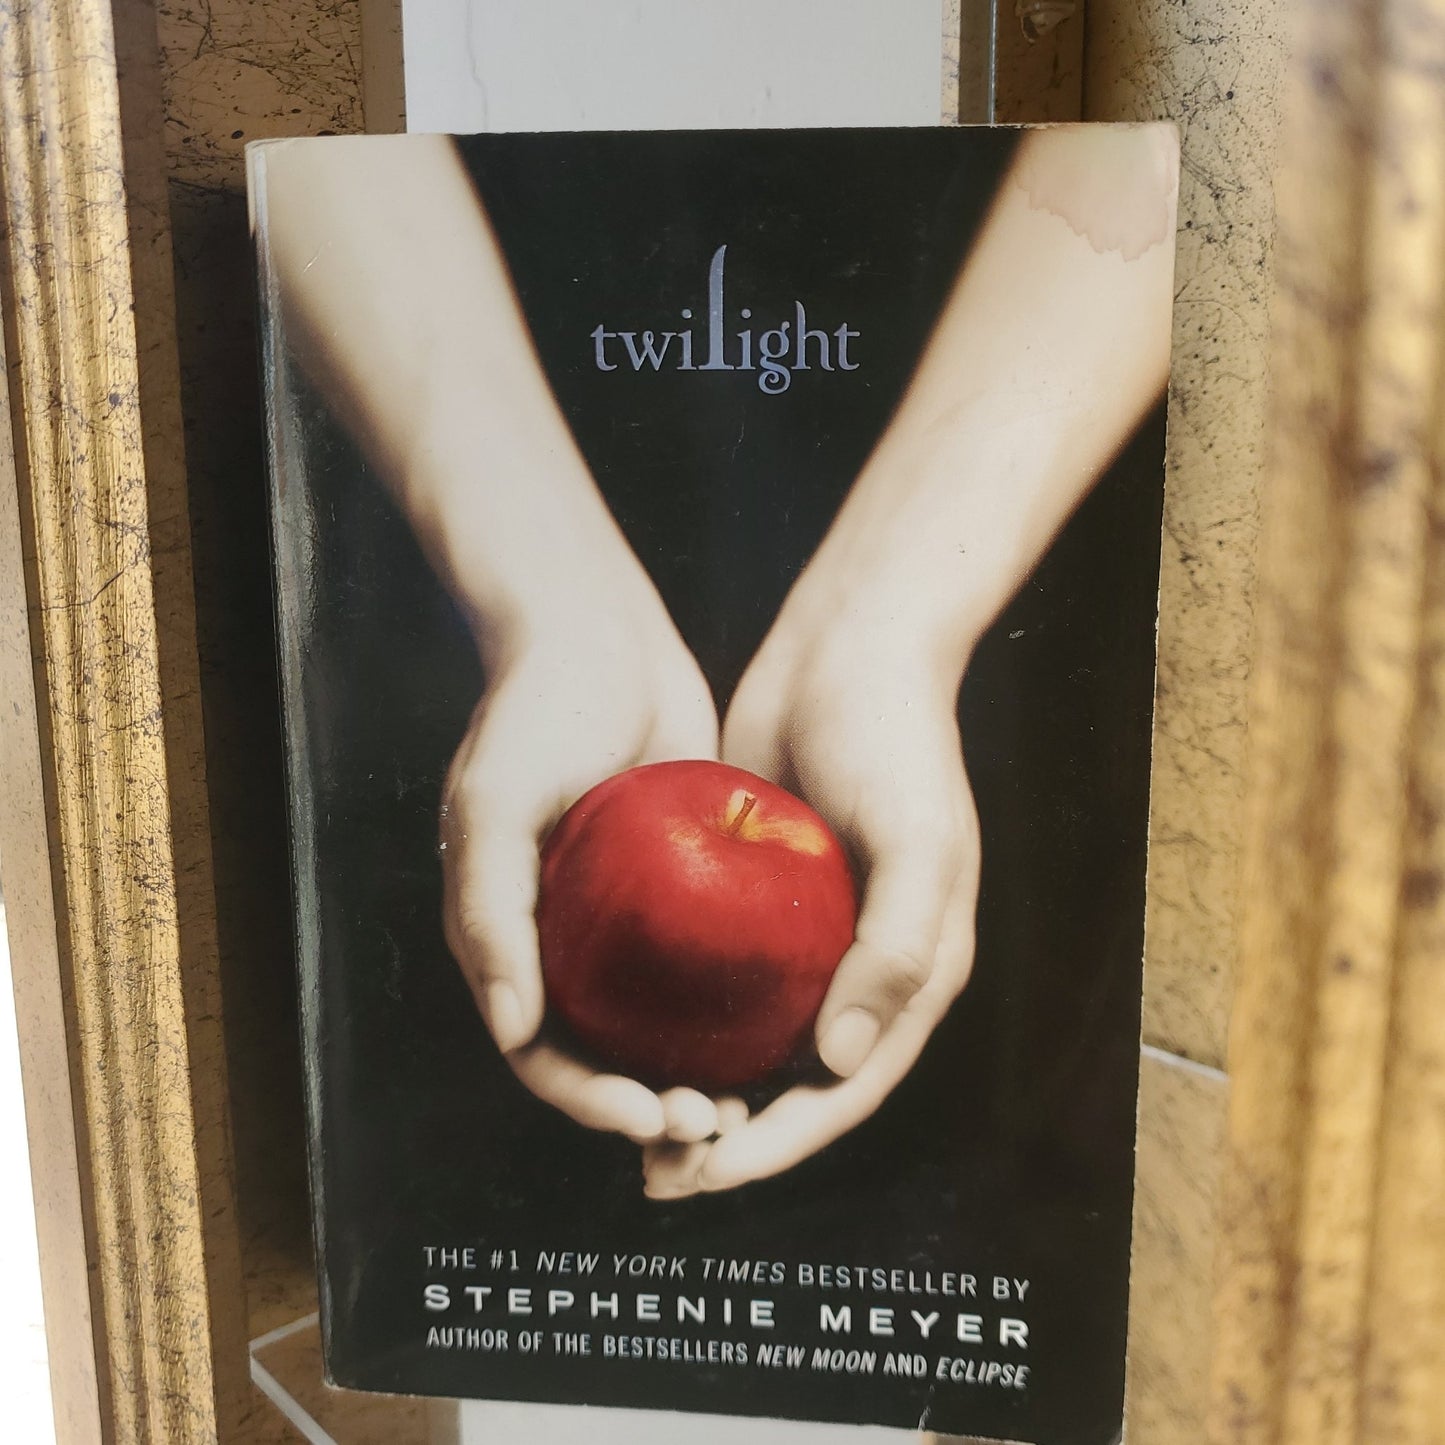 Twilight - [ash-ling] Booksellers